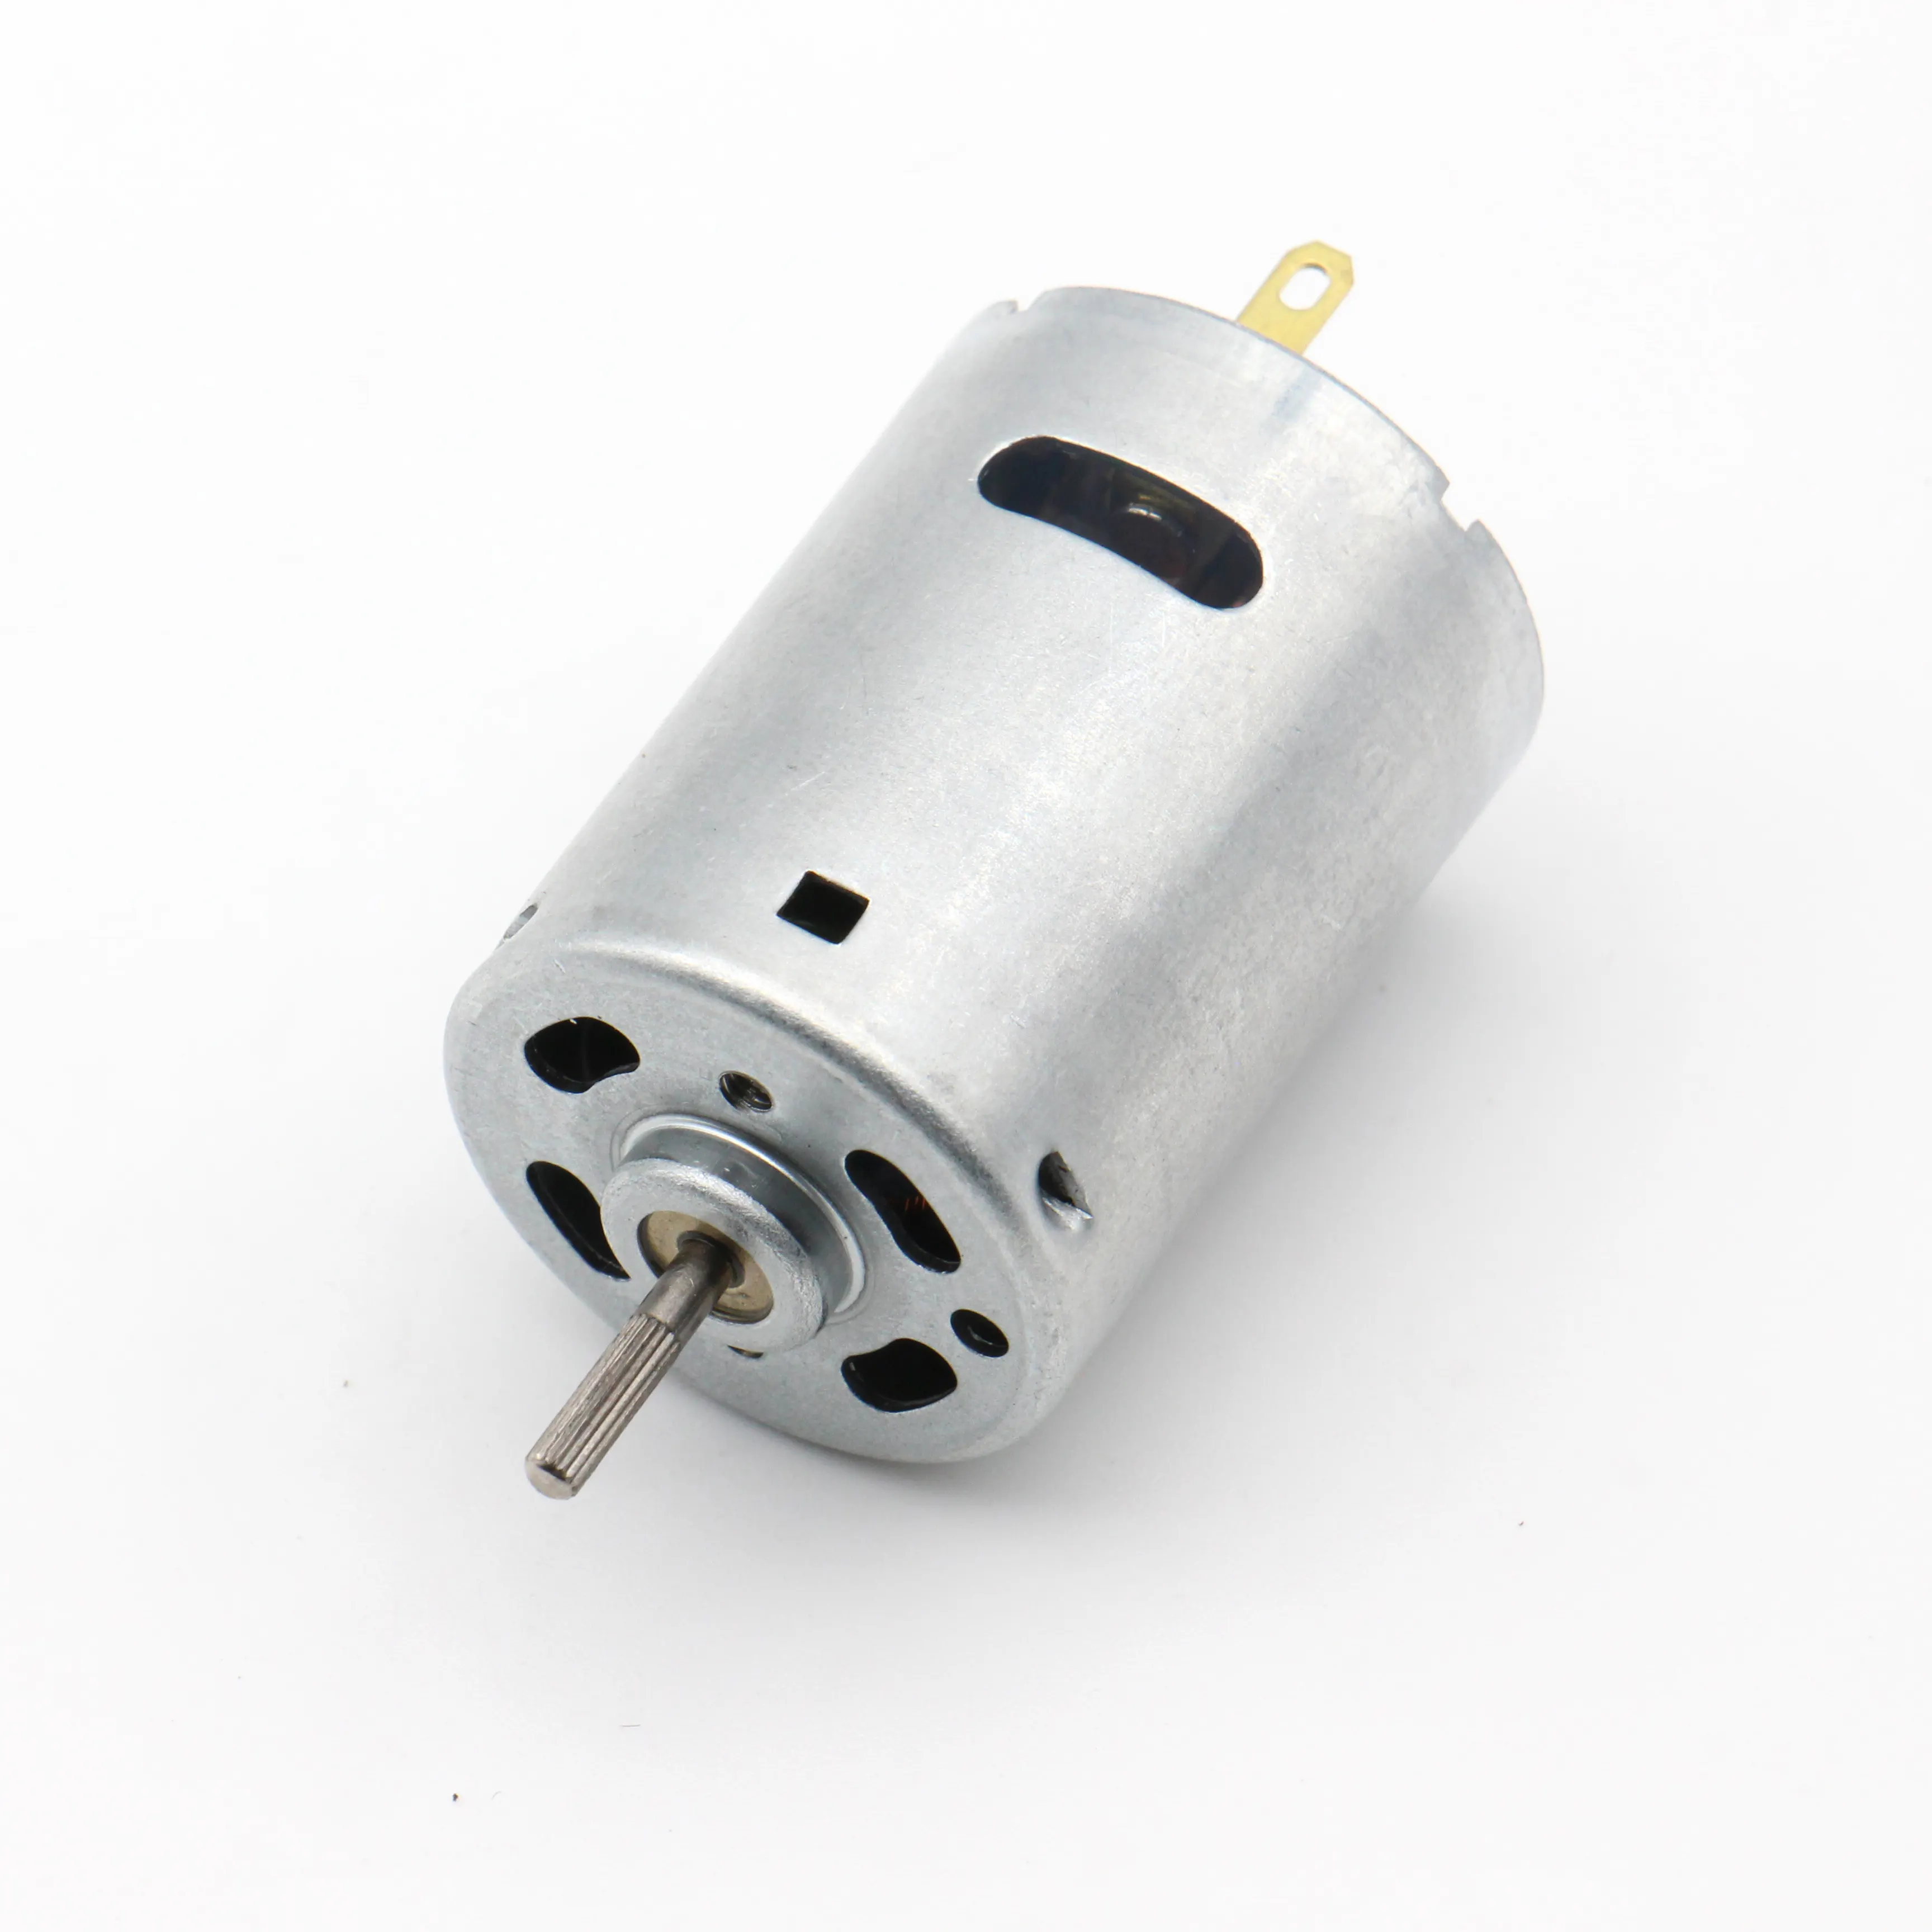 Hot Sale Powerful 24Volt 11900RPM 385SH DC Mini Brush Motor for Hair Dryer and Massager